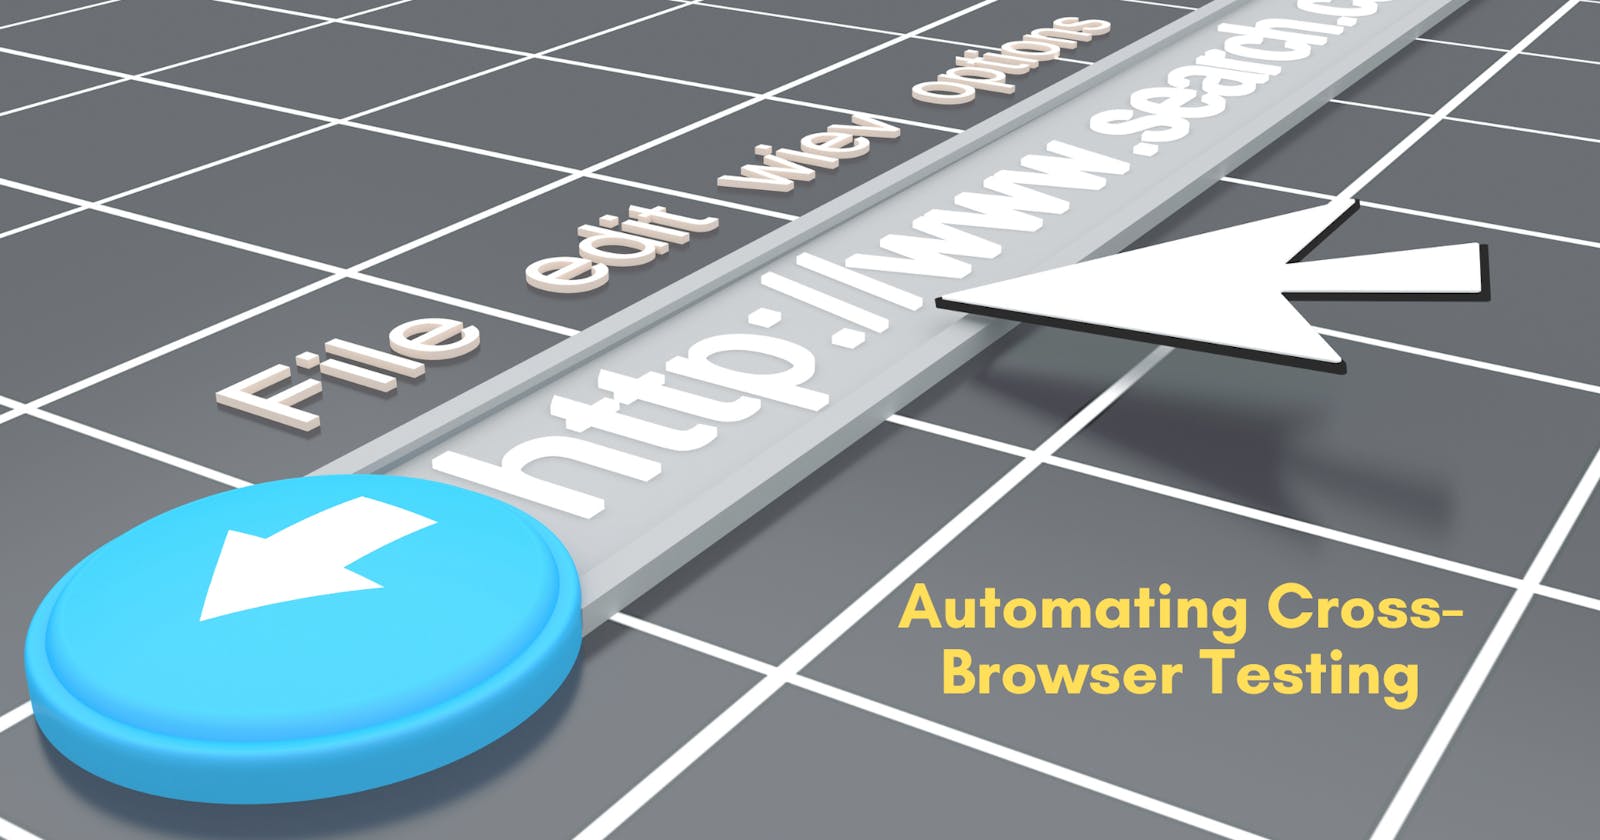 Automating Cross-Browser Testing